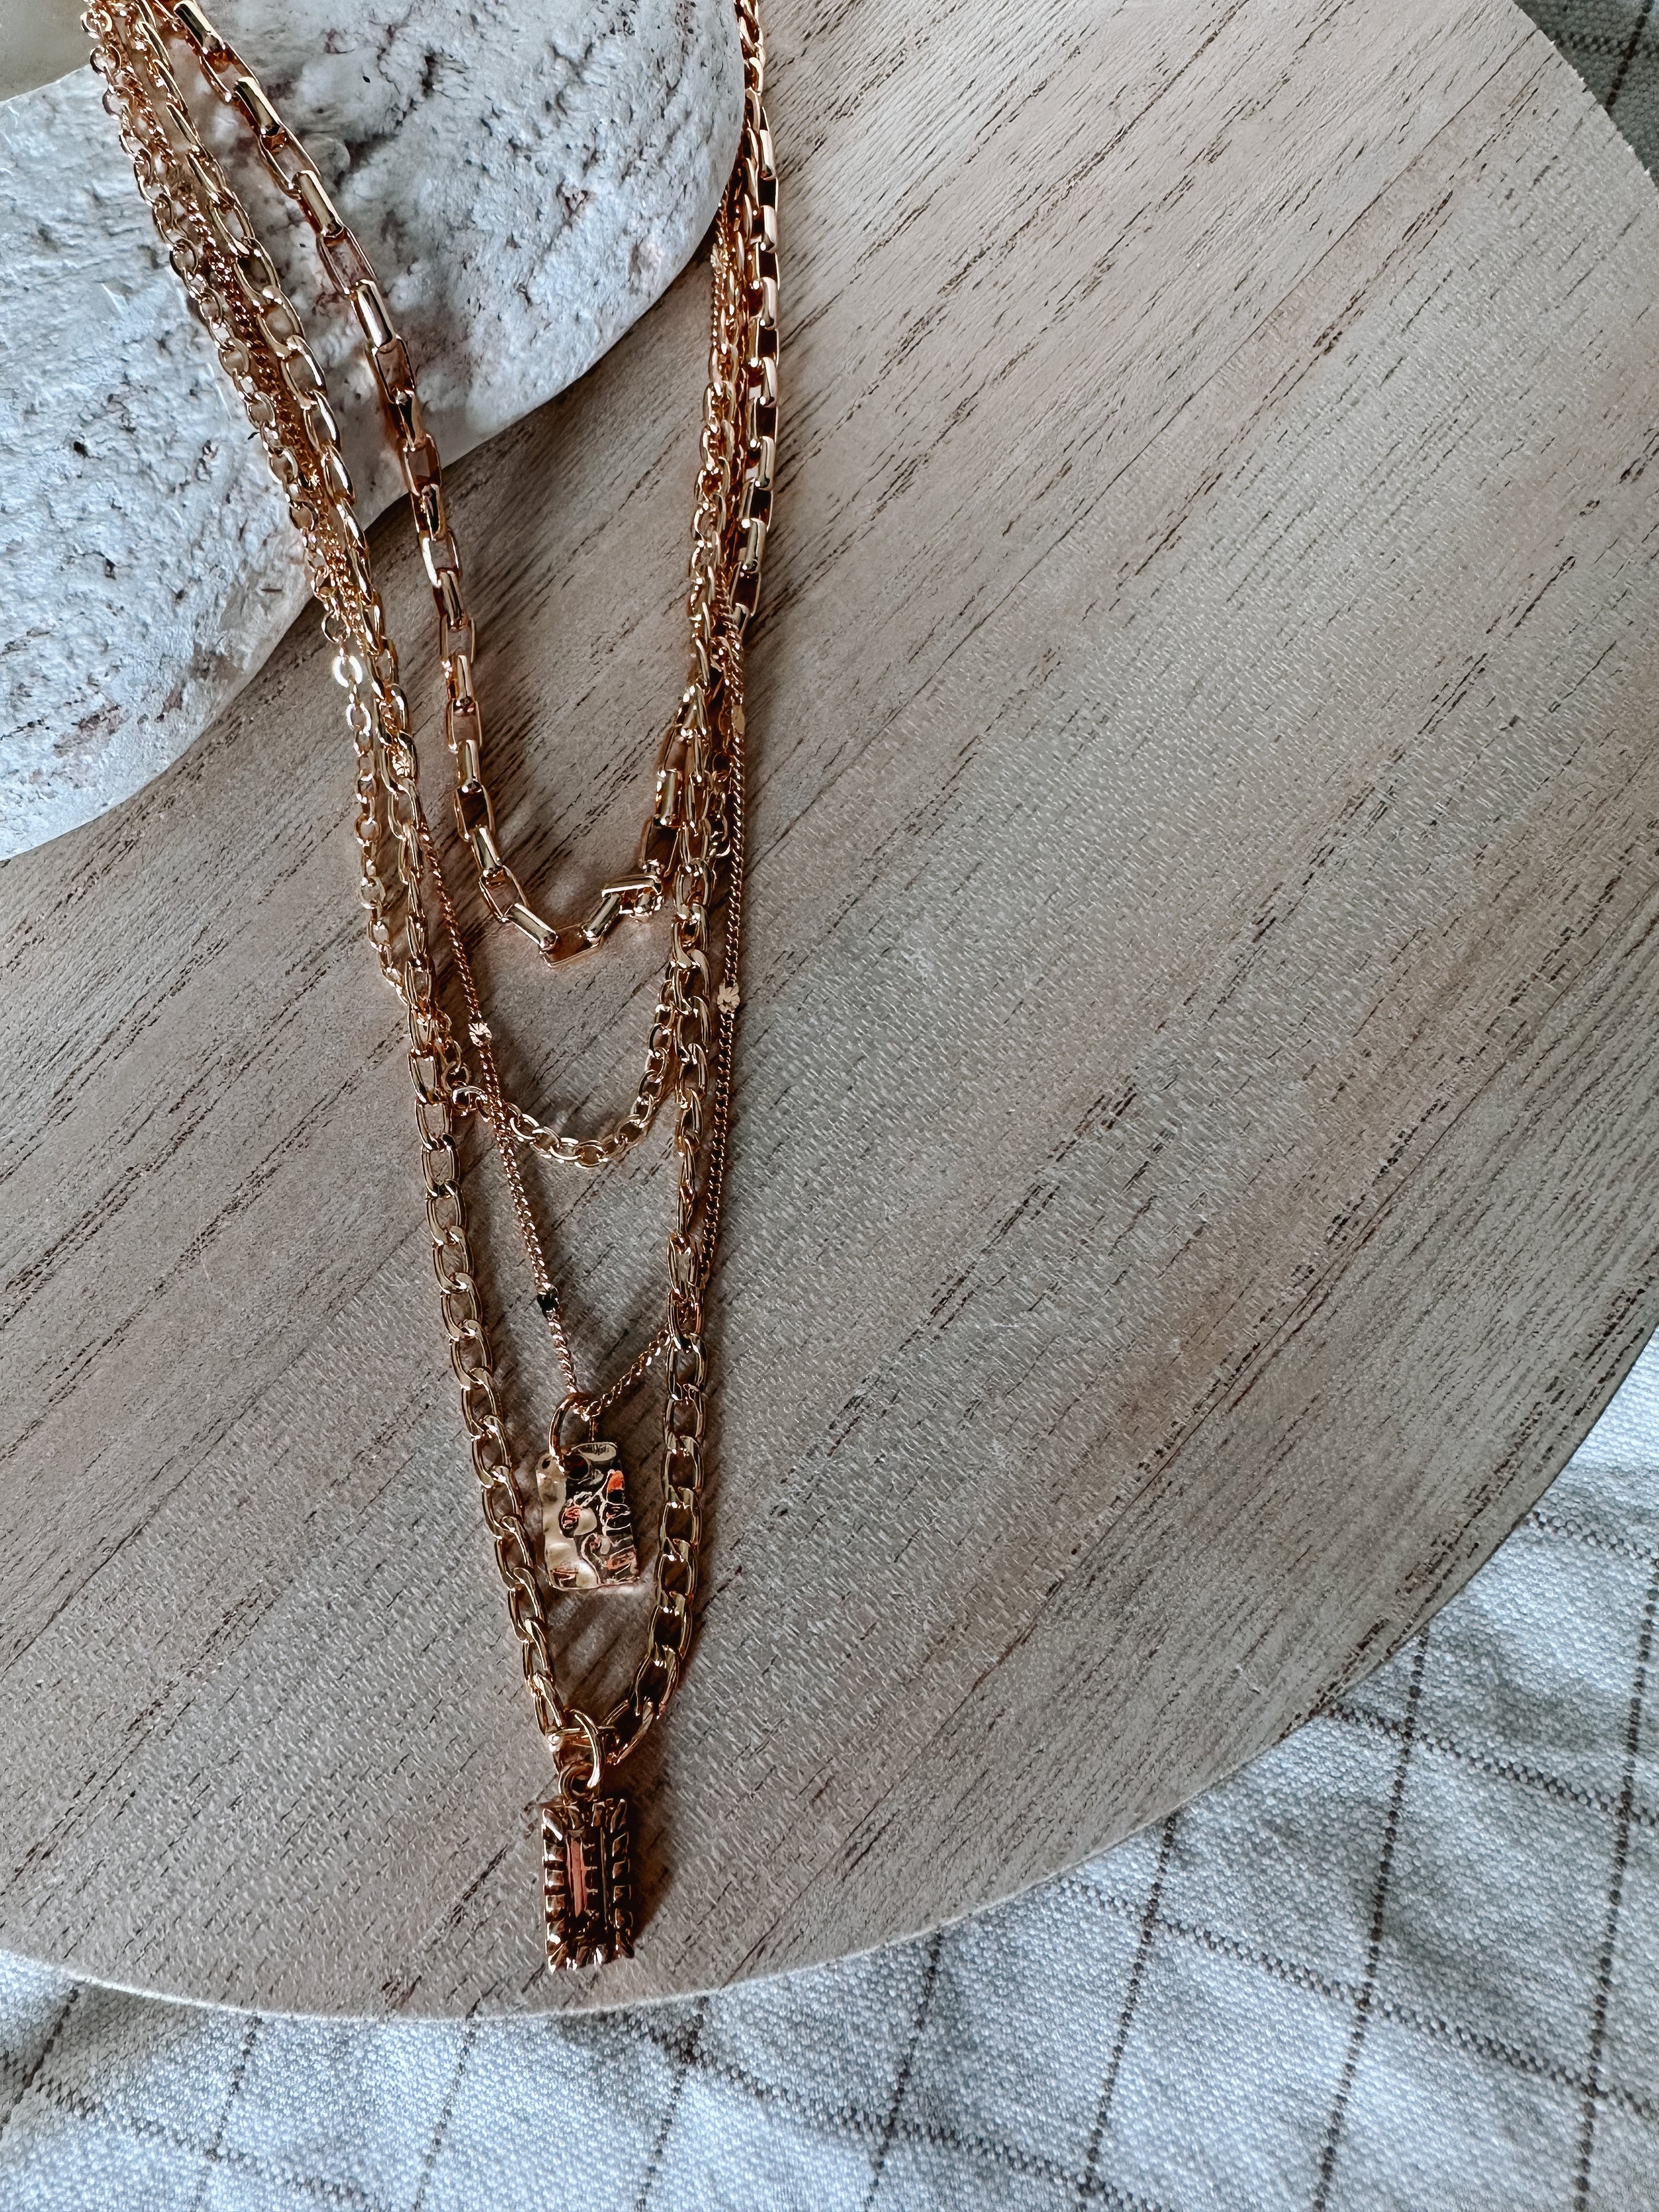 WARREN JAMES ROSE Gold Finish Infinity Necklace And Earrings £15.00 -  PicClick UK